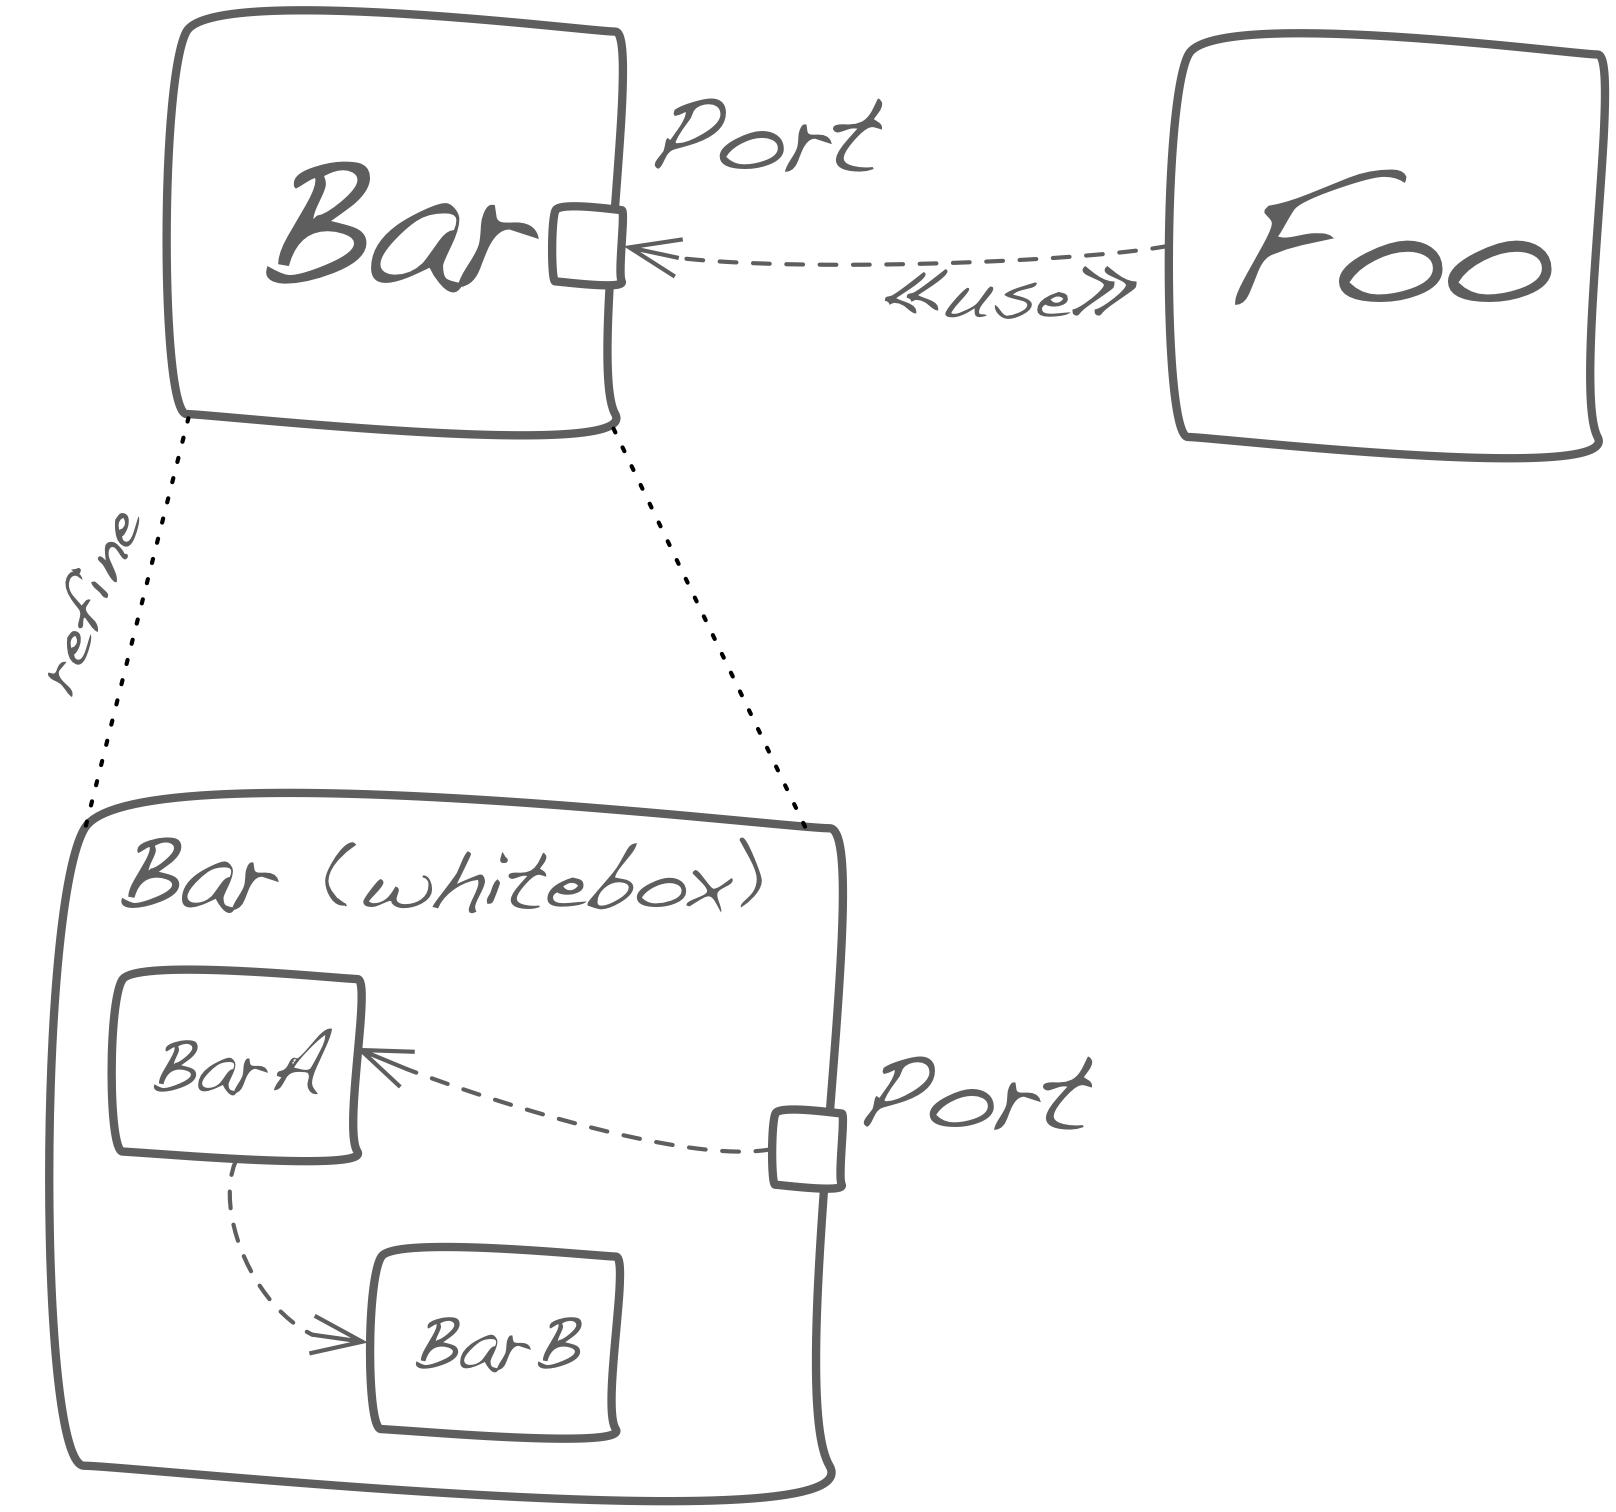 Ports to show mapping between blackbox and its refinement